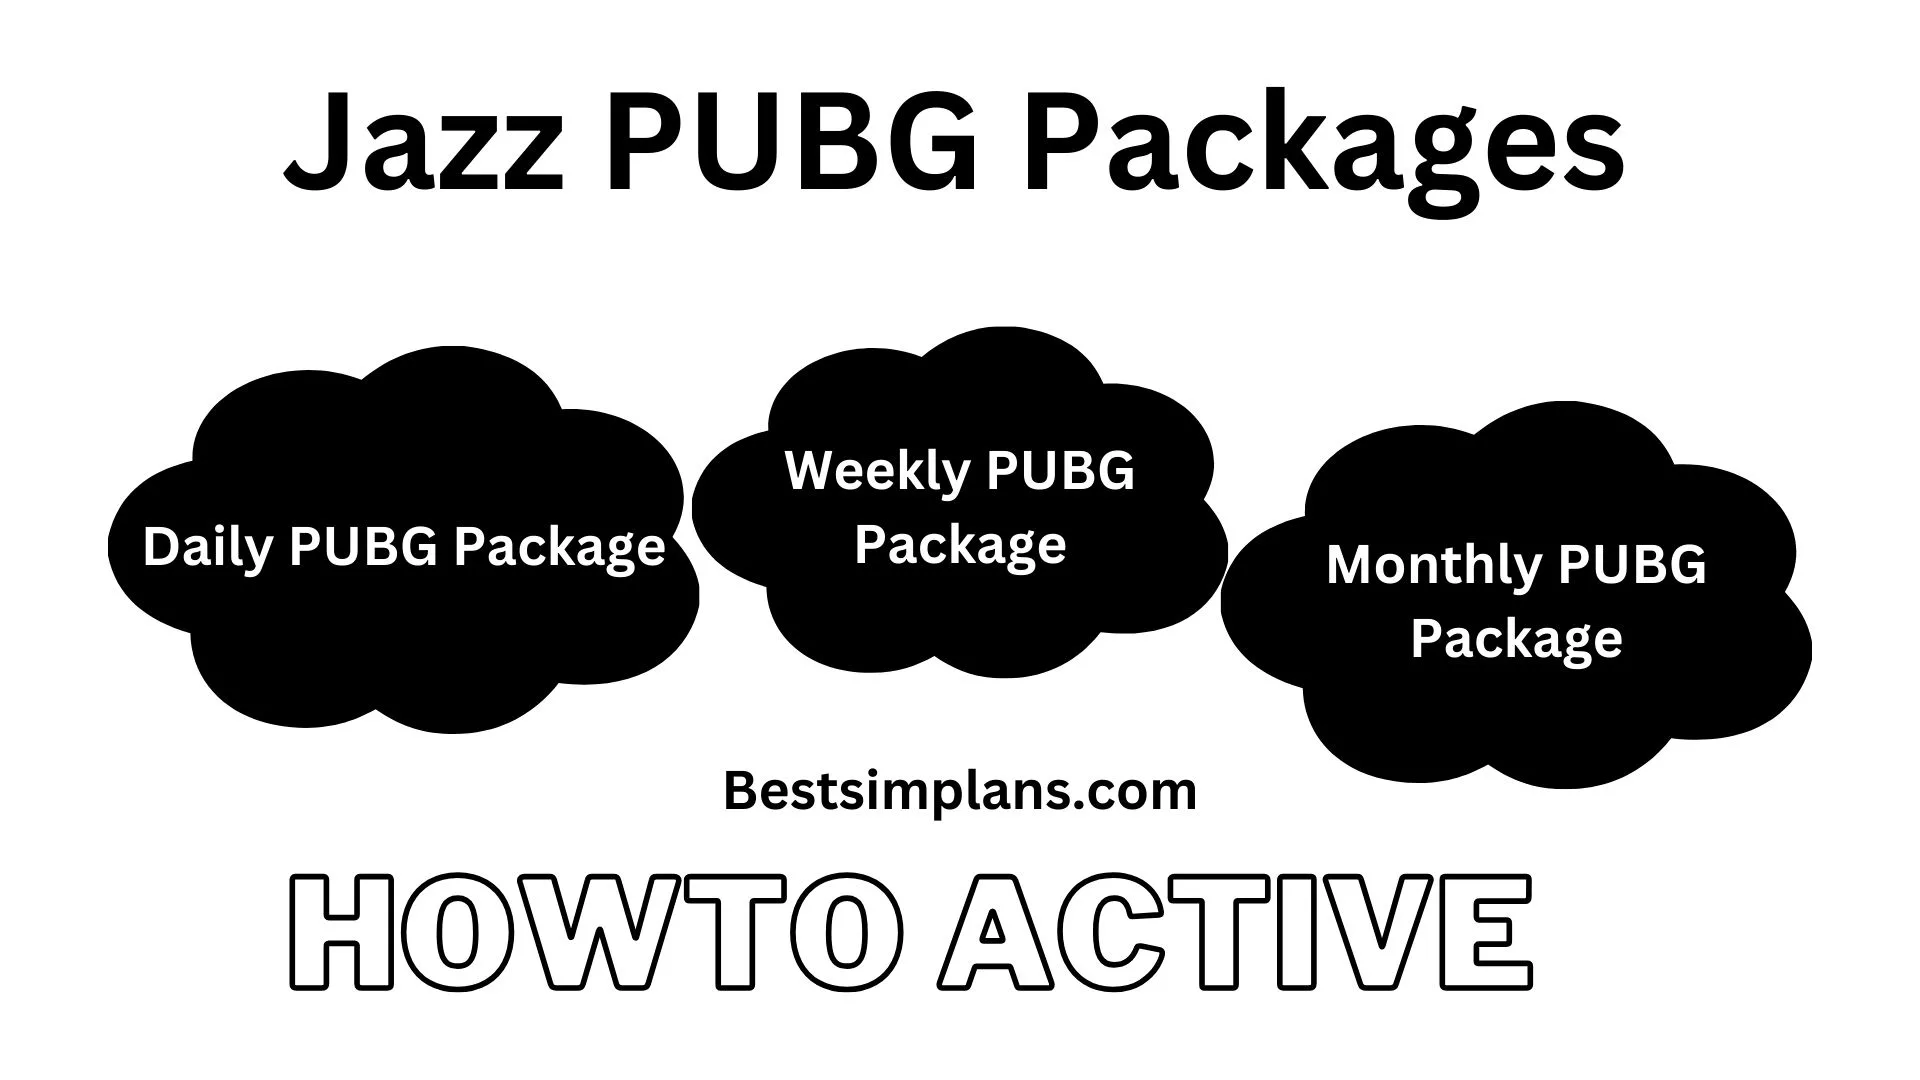 Jazz PUBG Package Monthly 100 Rupees Code